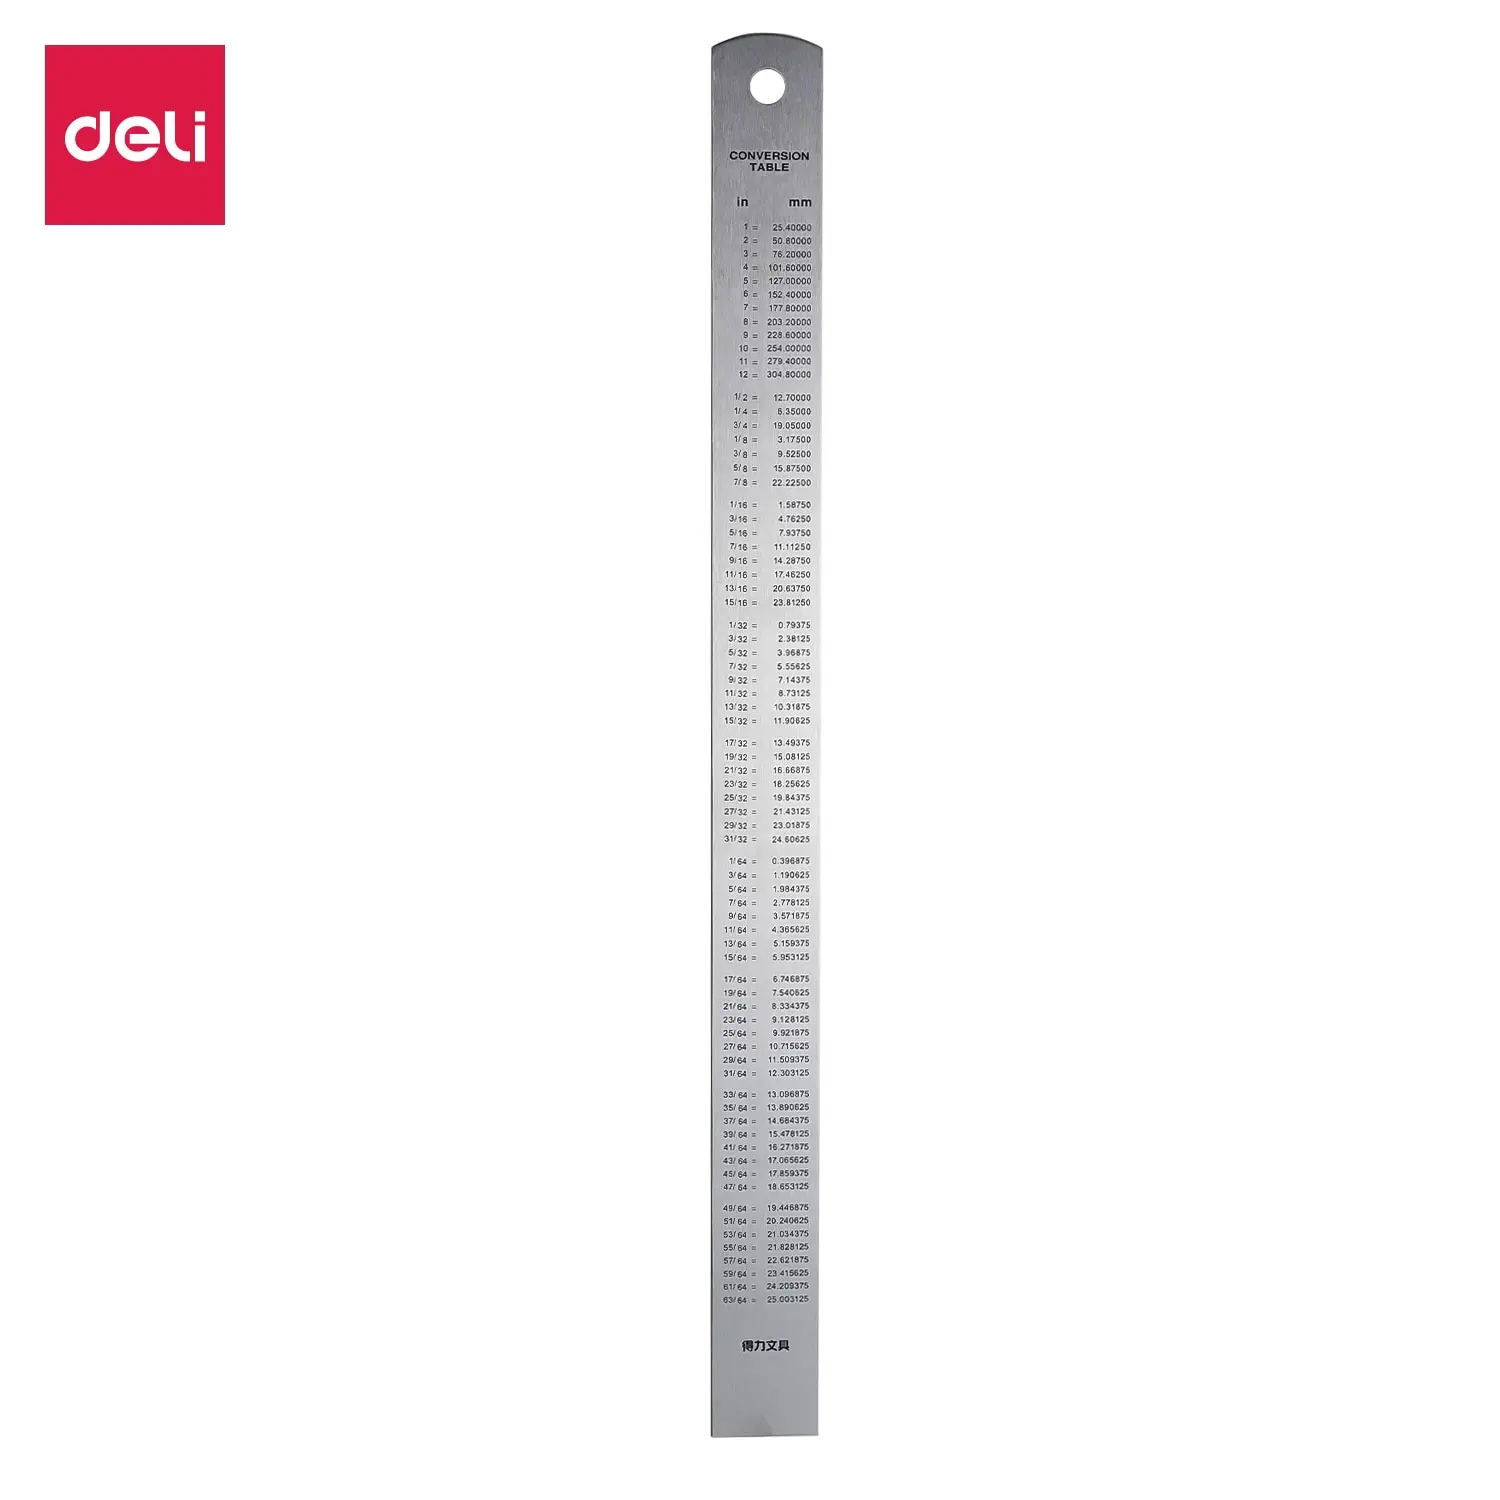 

Deli 1pcs 30cm Stainless Steel Straight Ruler Mapping Tool Silver Metal Ruler Drawing Measuring Tool For School Office Supplies